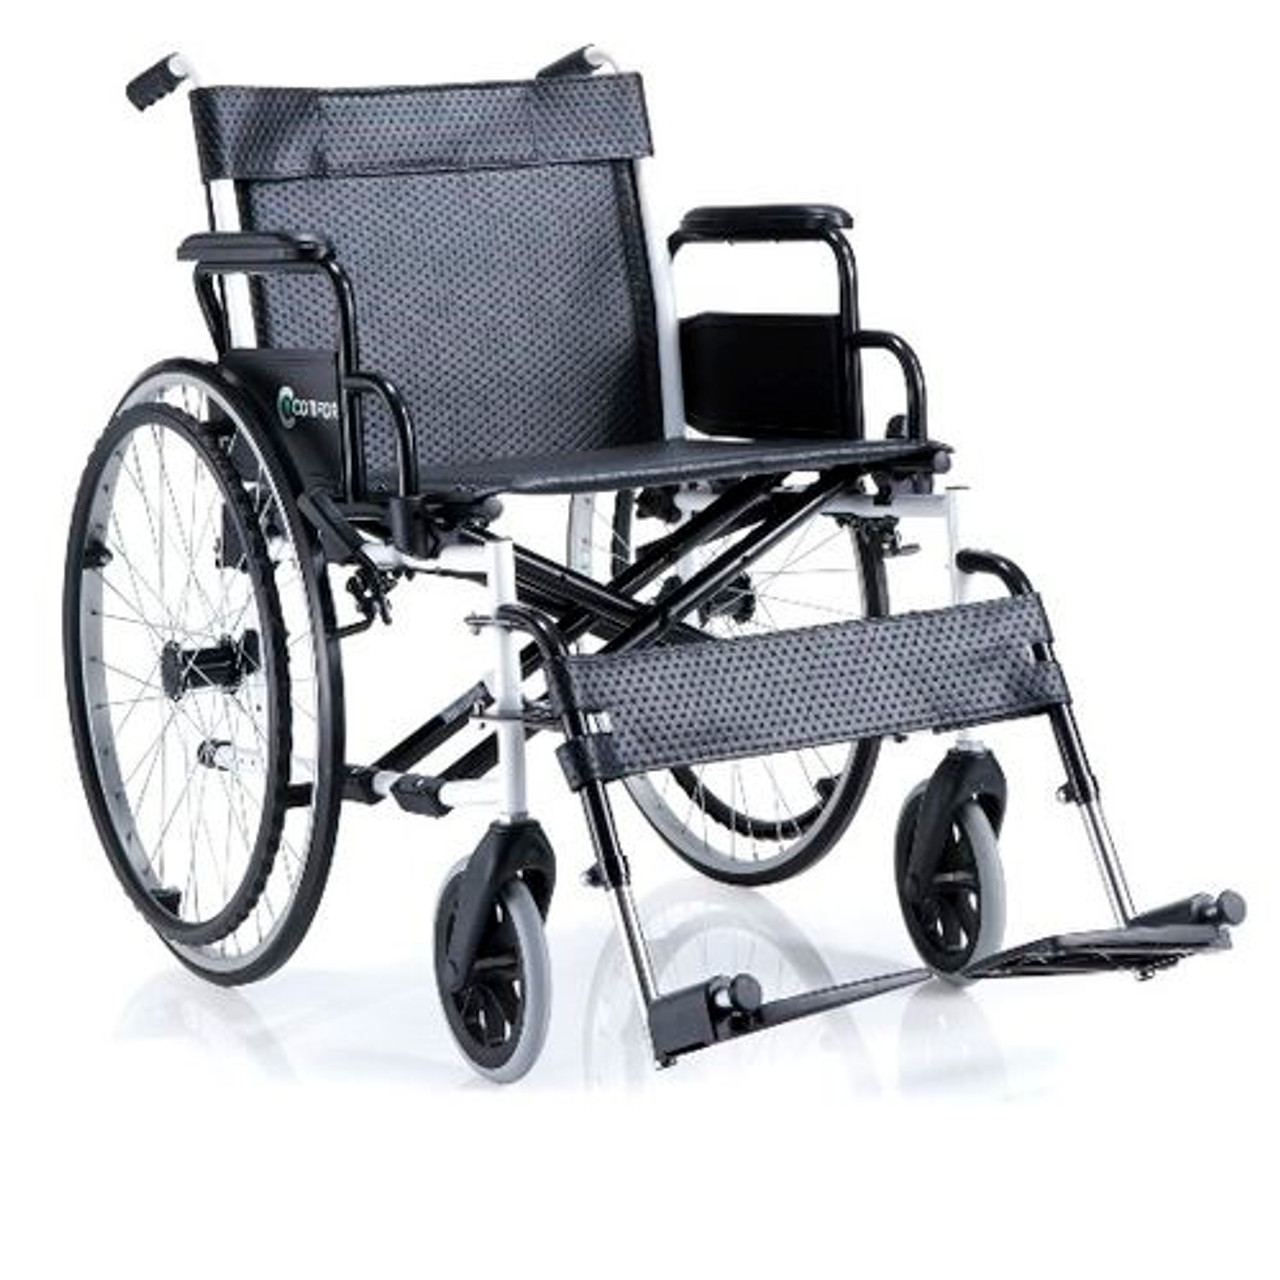 Buy MANUAL WHEEL CHAIR from GZ Industrial Supplies Nigeria